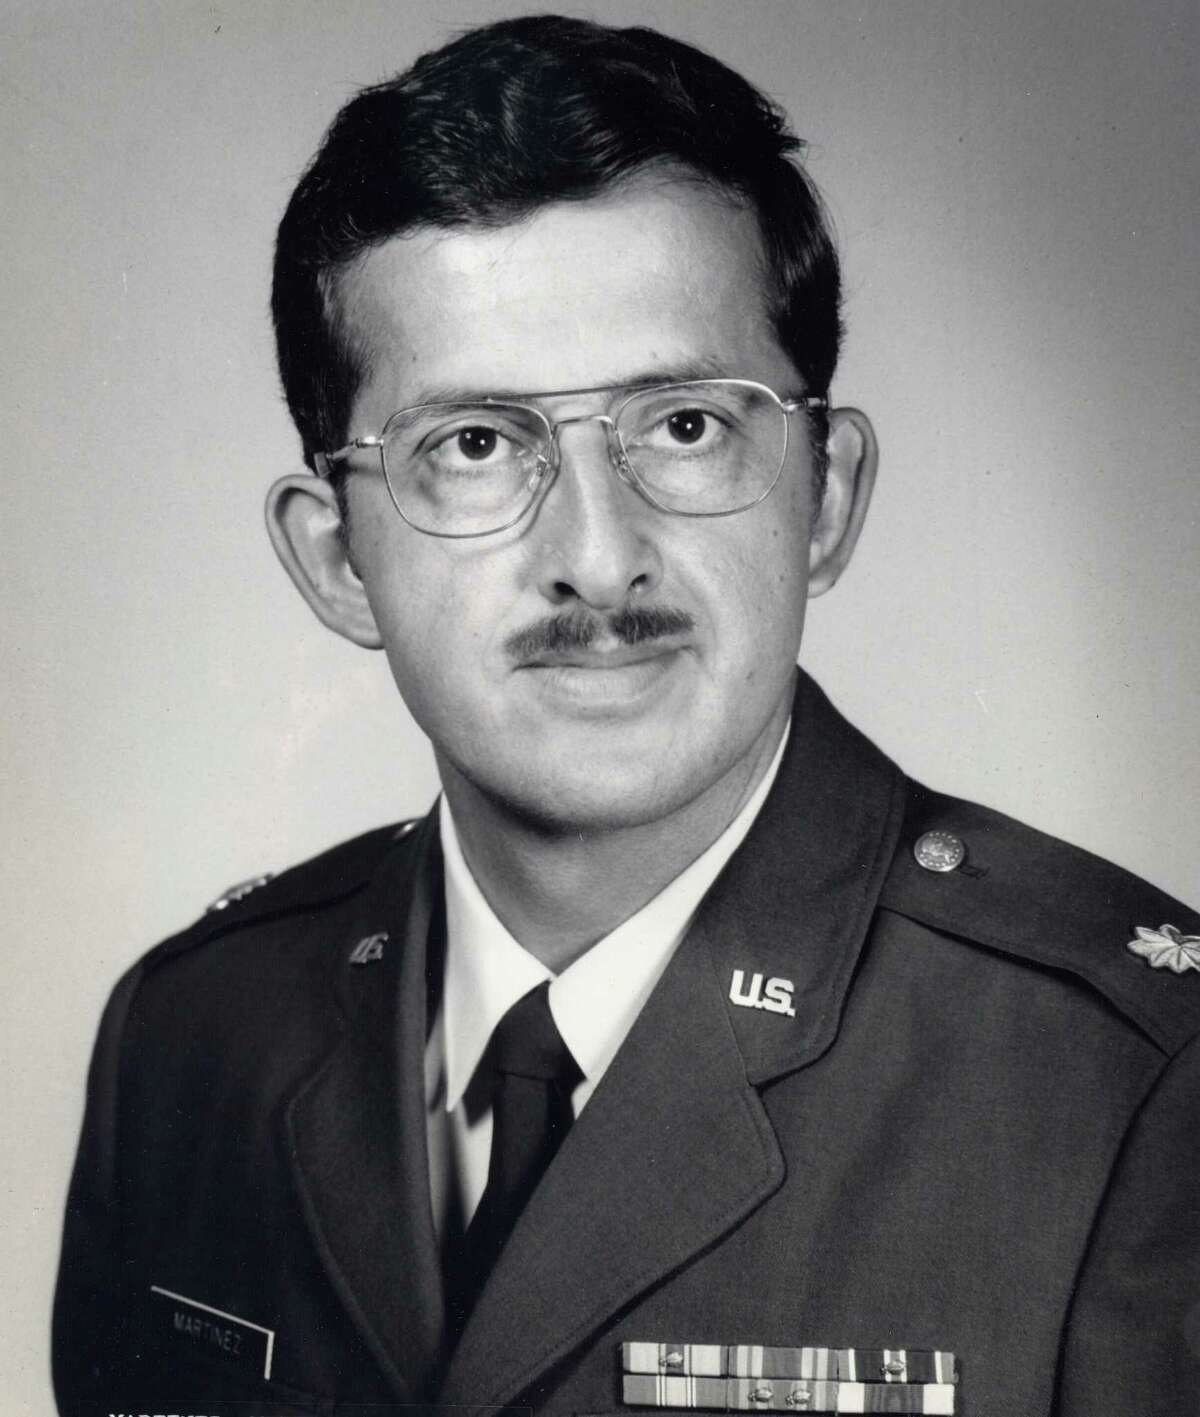 Melvin Martinez earned a master’s degree while working as a missile operations deputy.